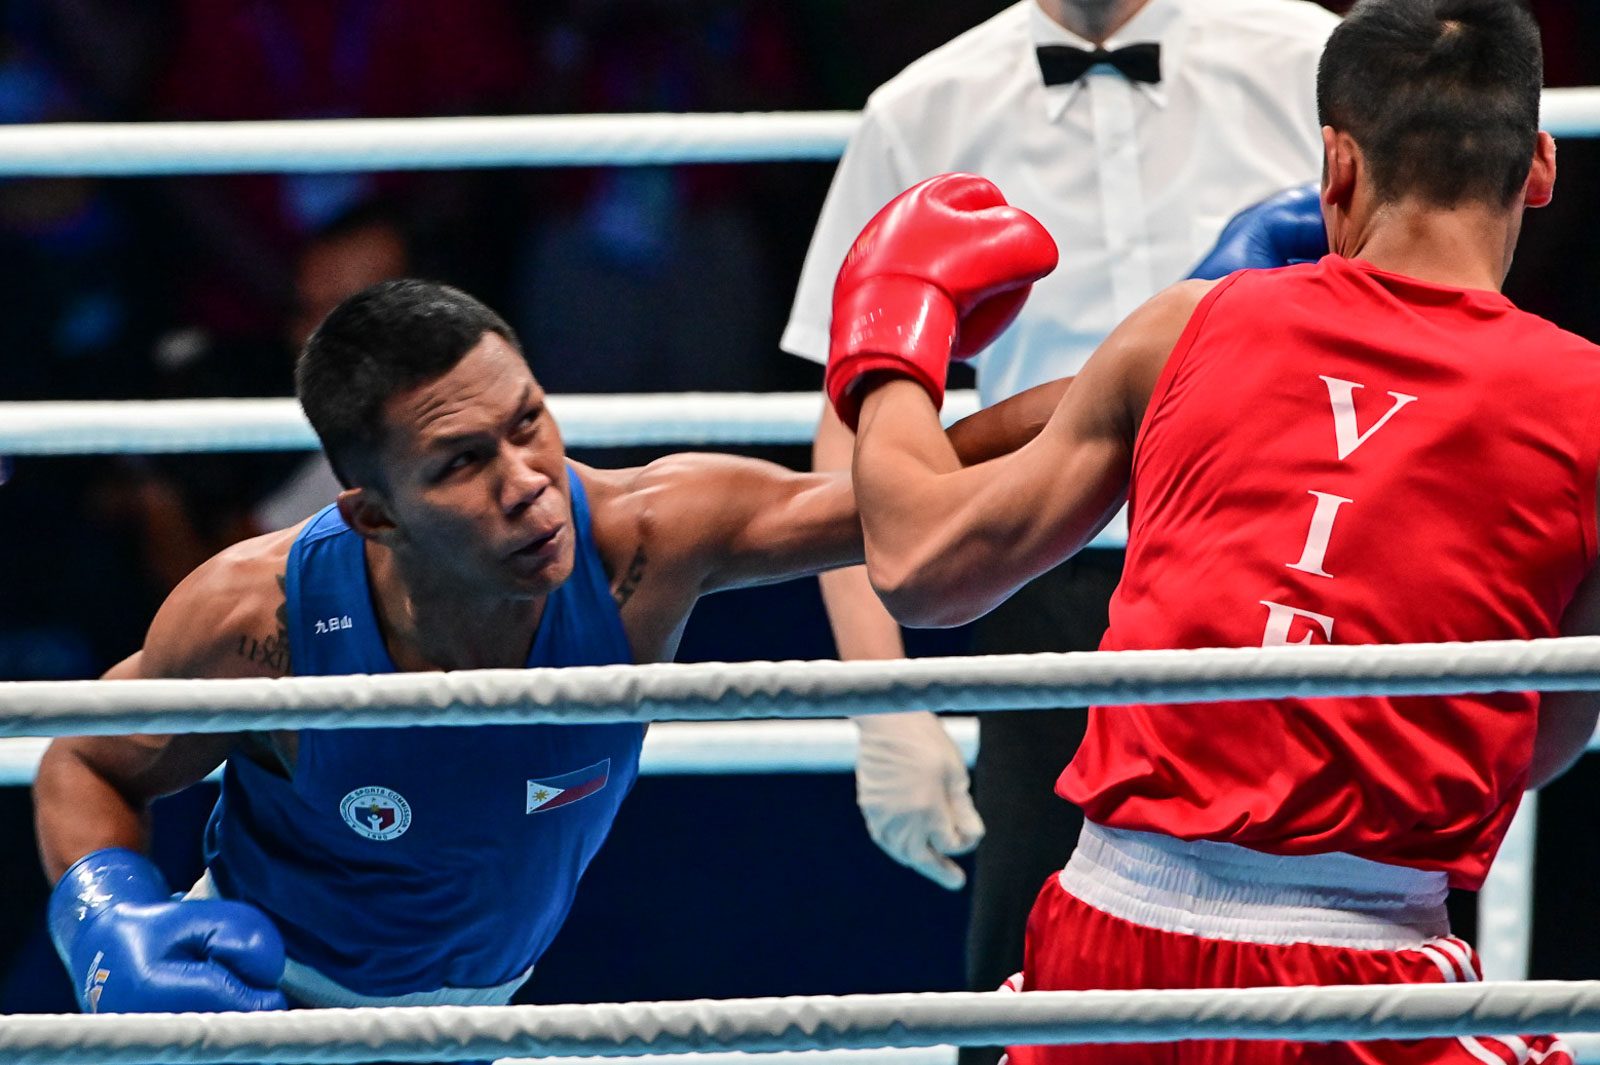 John Marvin shock exit lit Marcial fire to capture SEA Games boxing gold